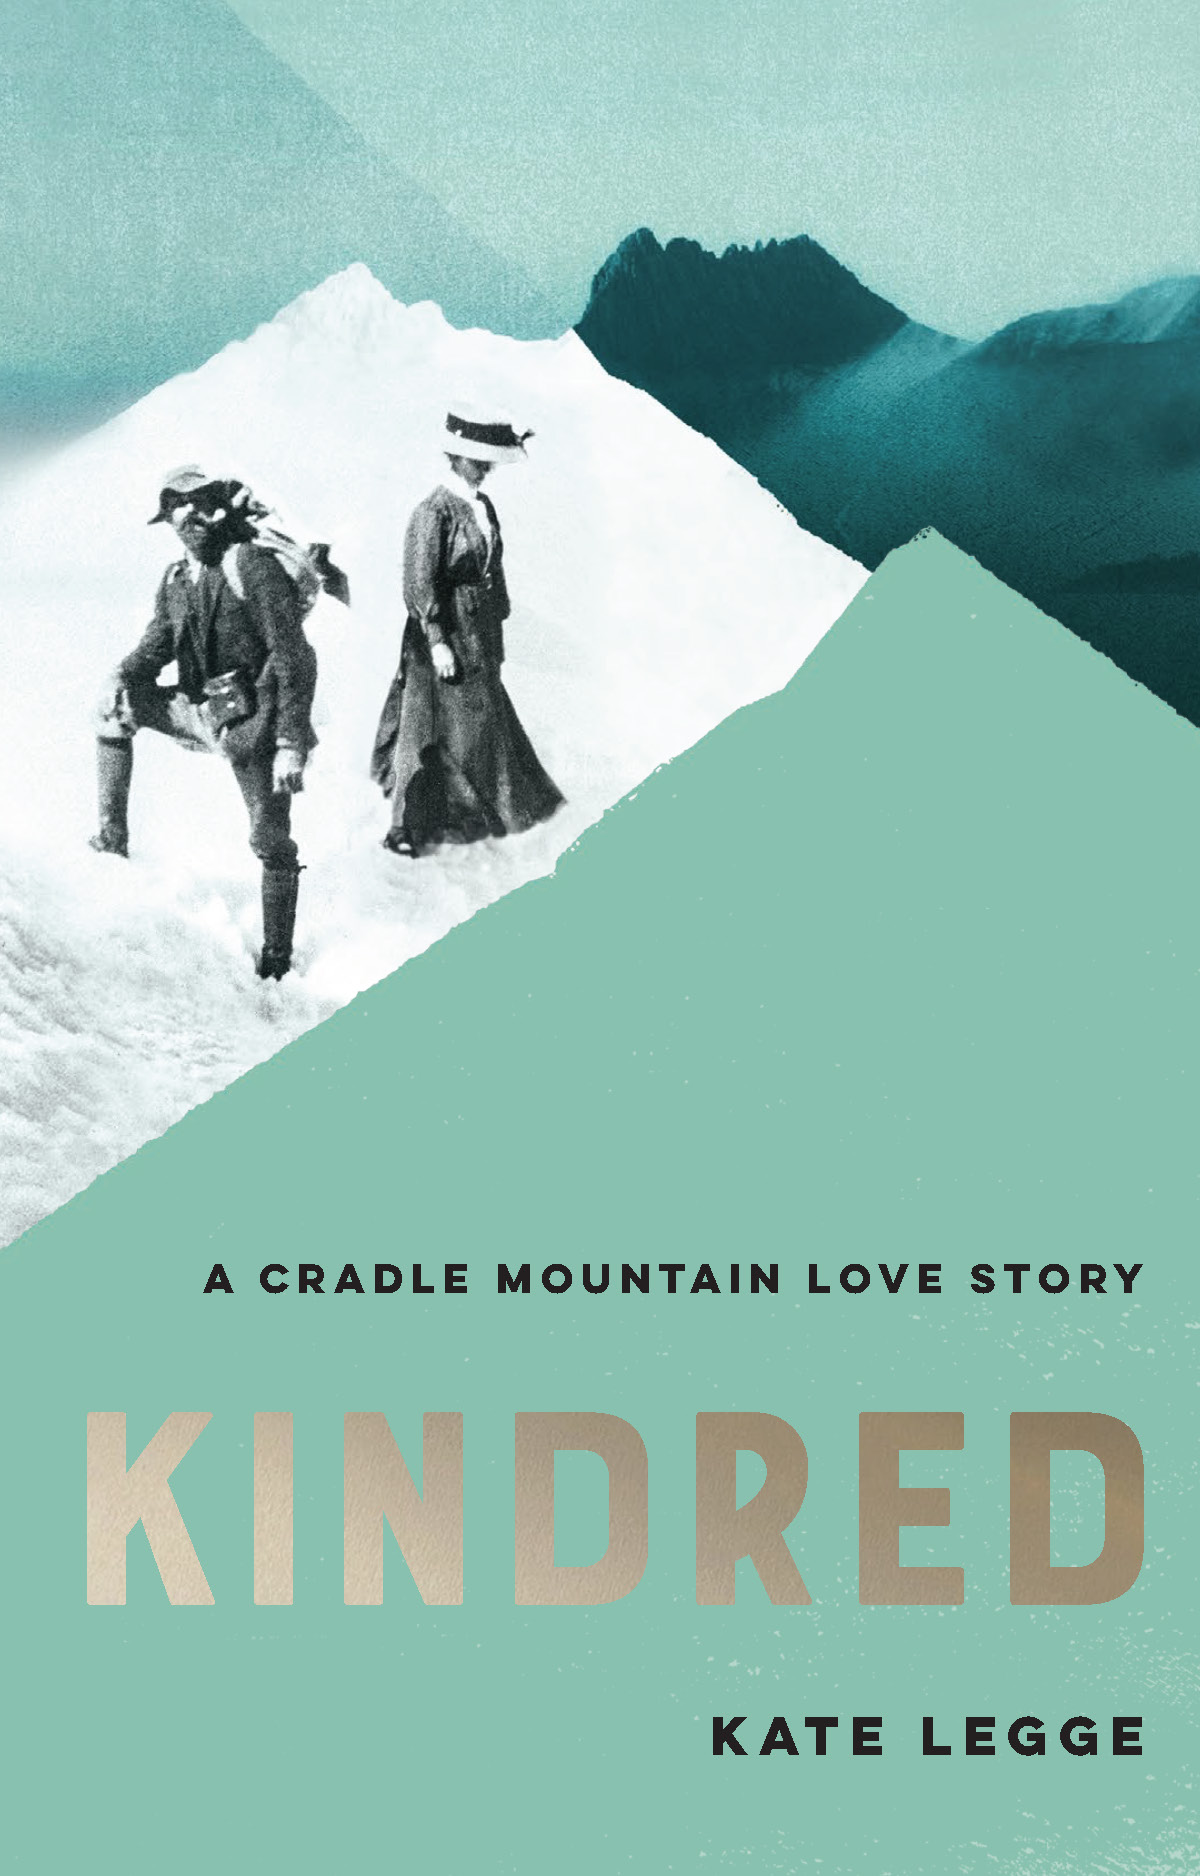 Kindred: A Cradle Mountain Love Story by Kate Legge (MUP)